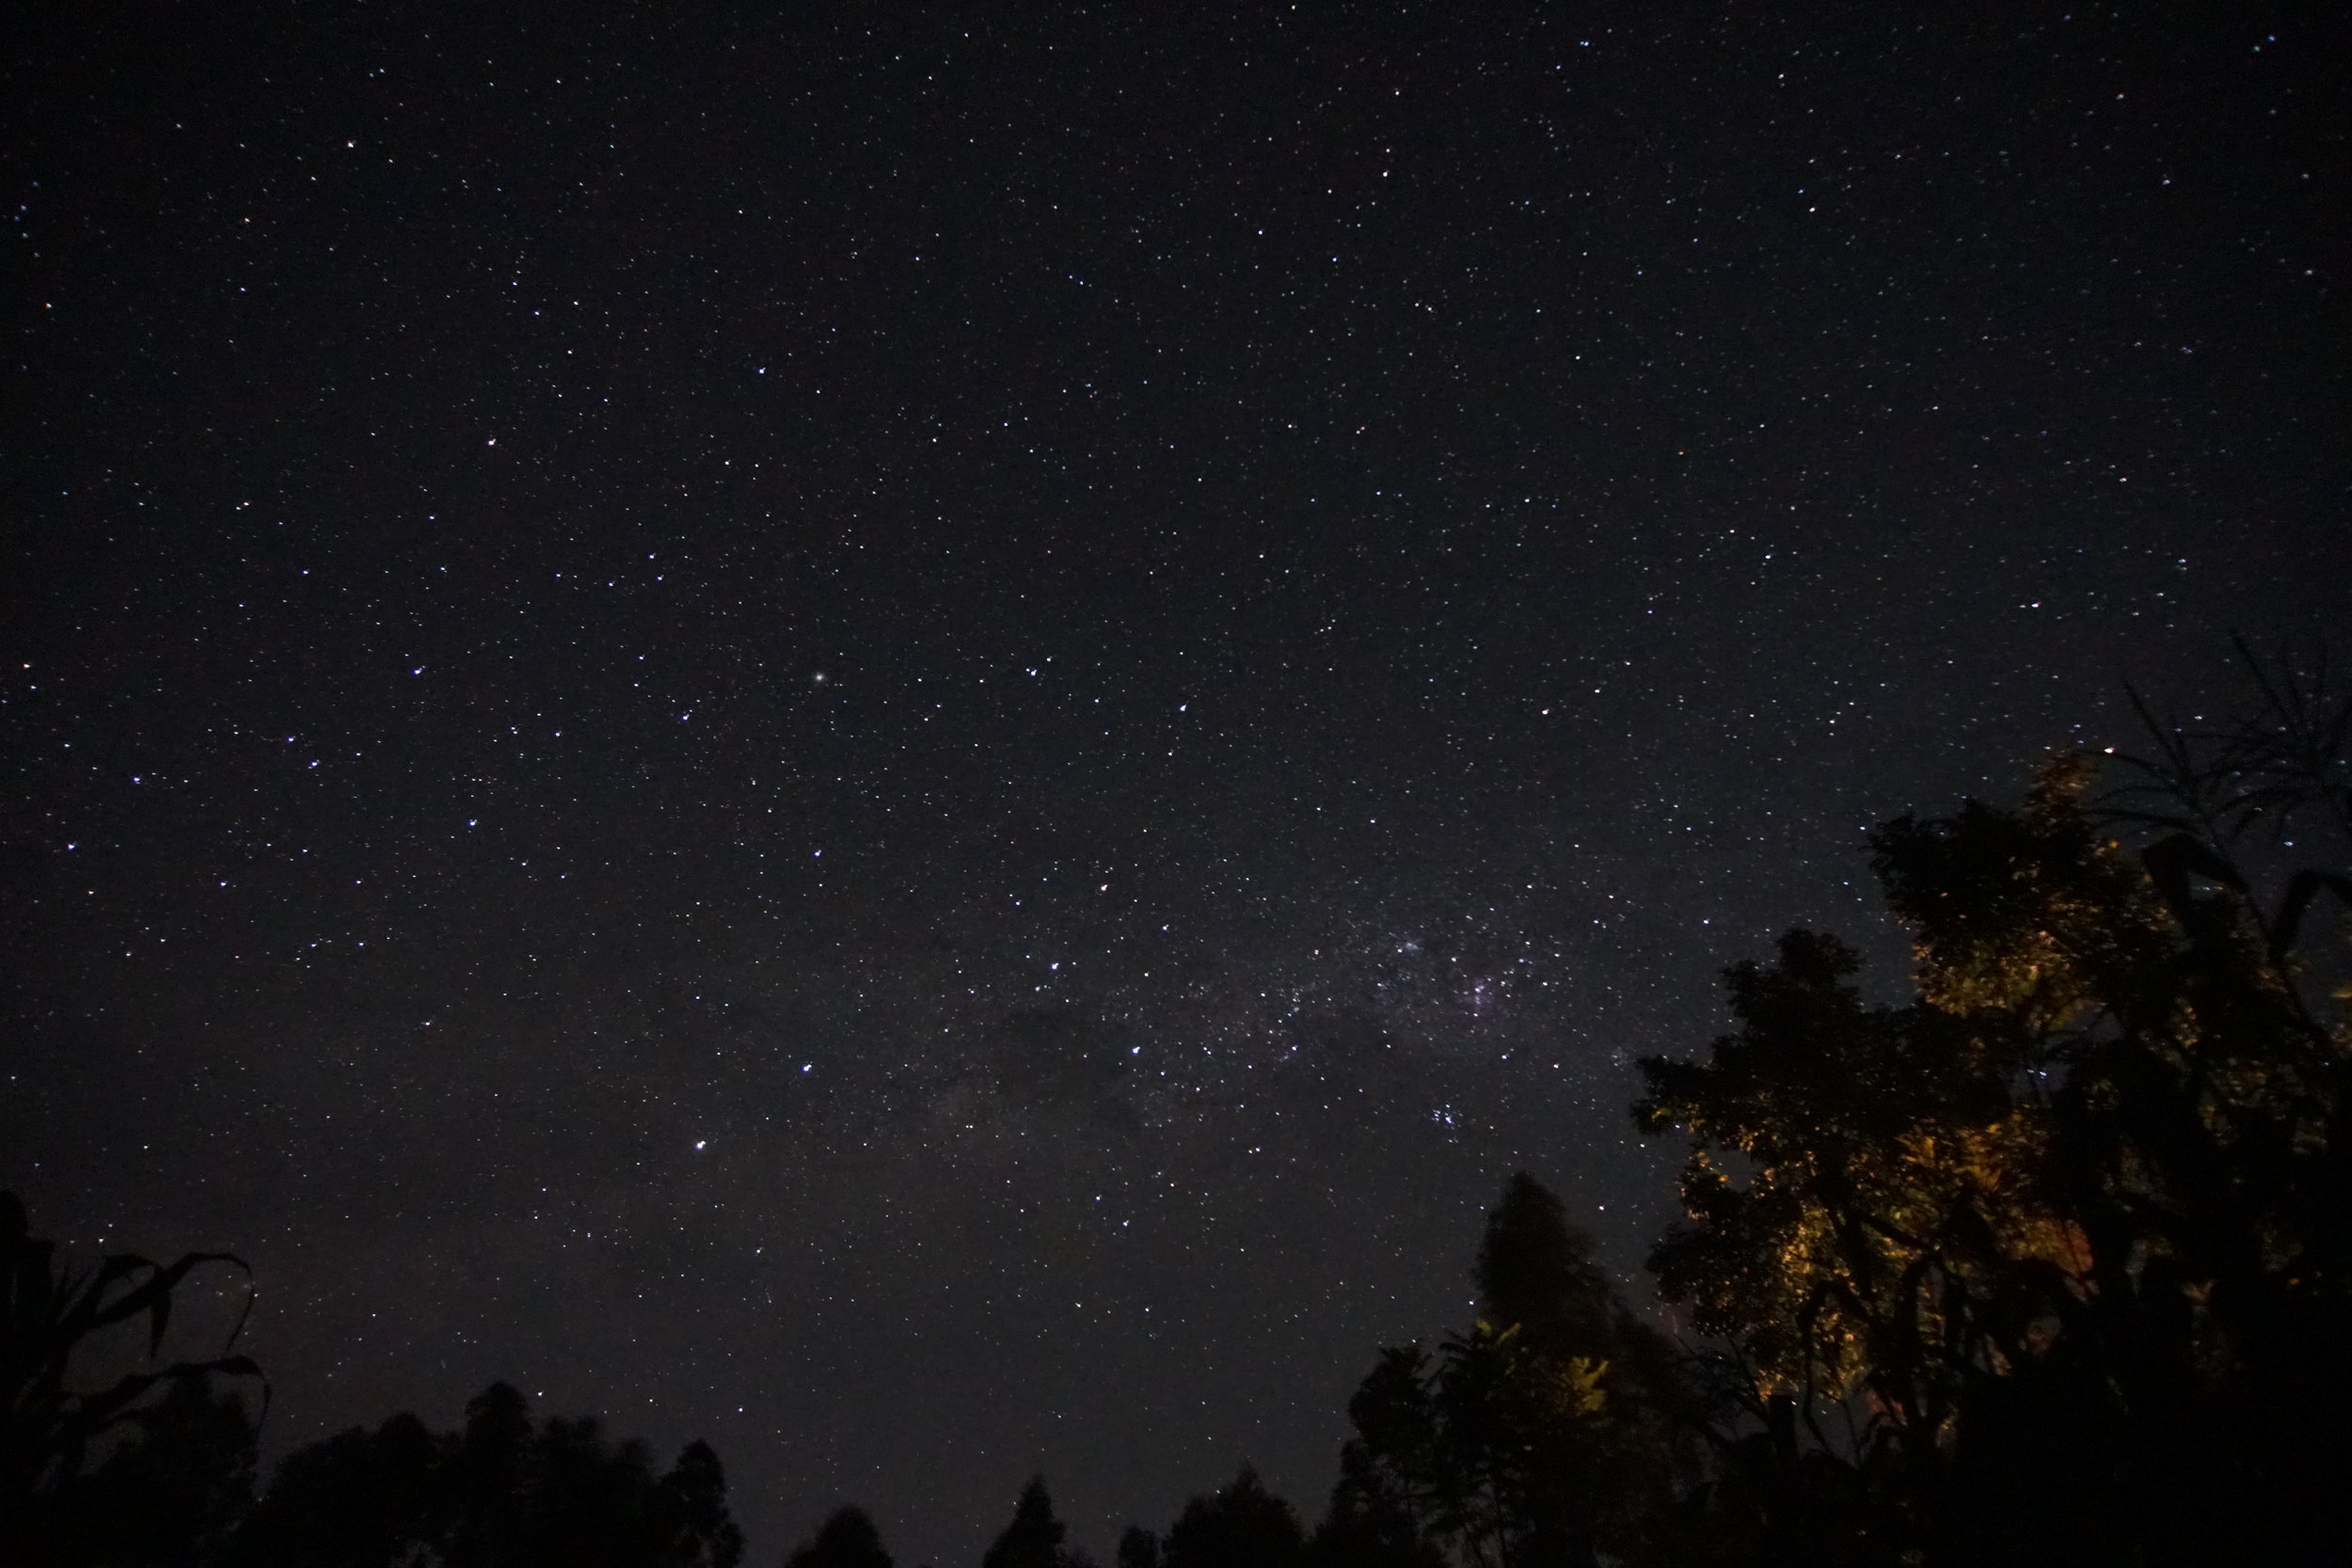  Because Kimilili is so far away from major cities, there is little to no light pollution. The stars in the sky every night would incredibly visible and vibrant. 